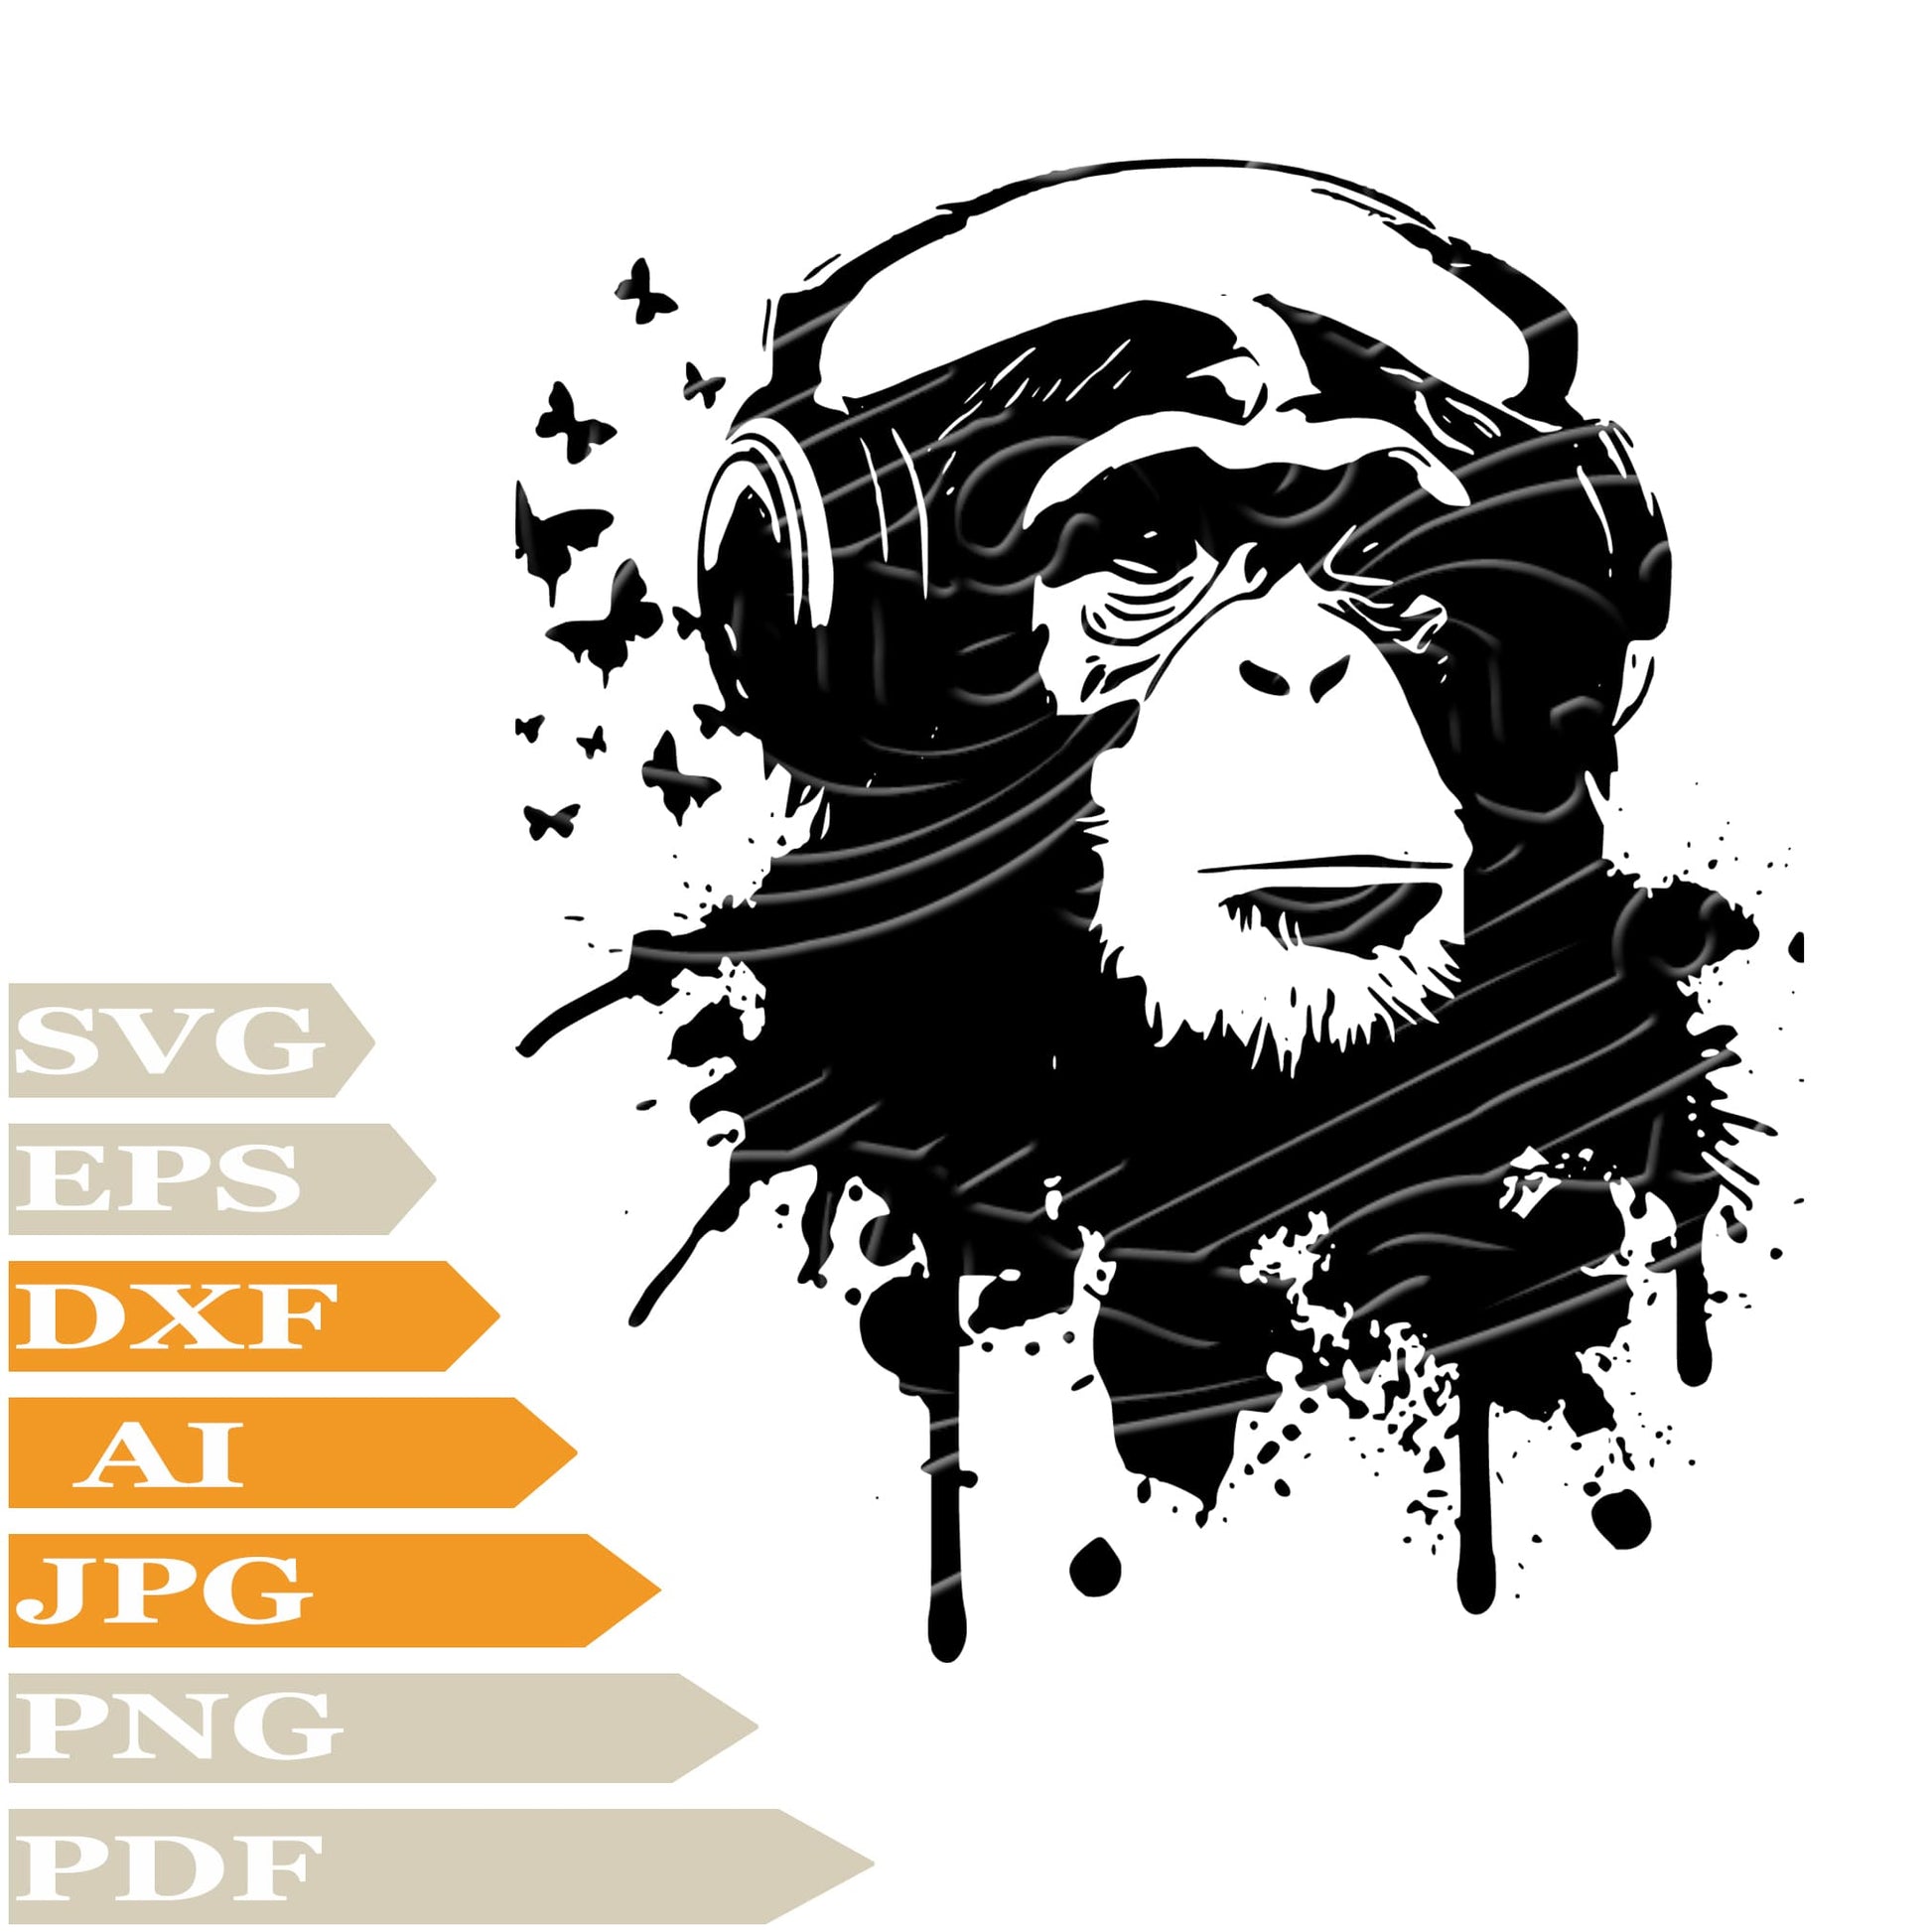 Monkey, Monkey With Headphones Svg File, Image Cut, Png, For Tattoo, Silhouette, Digital Vector Download, Cut File, Clipart, For Cricut